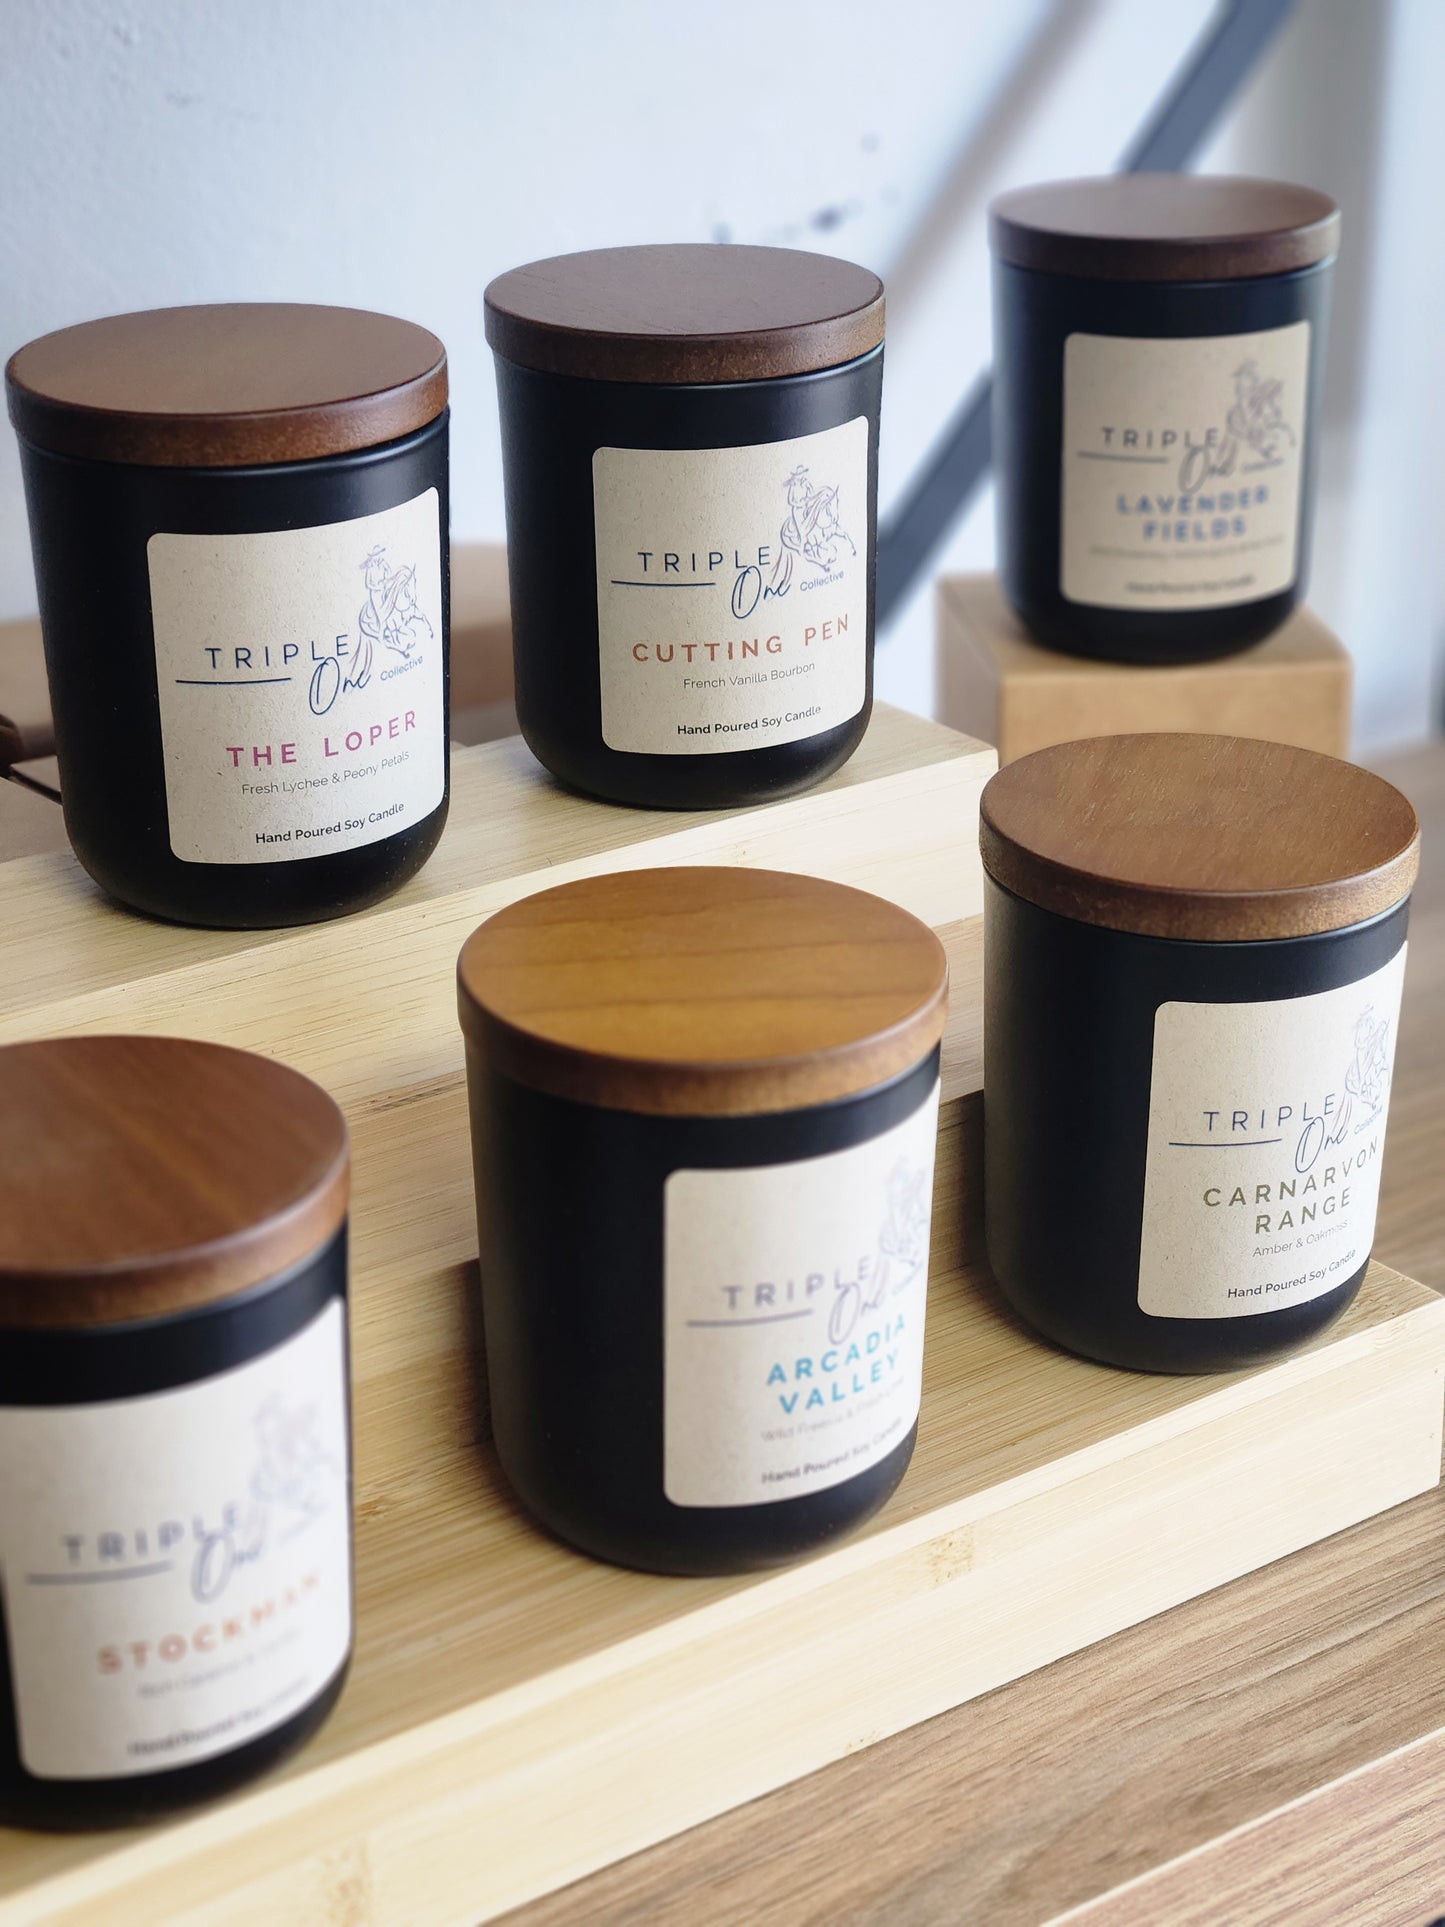 Hand-poured Soy Candles